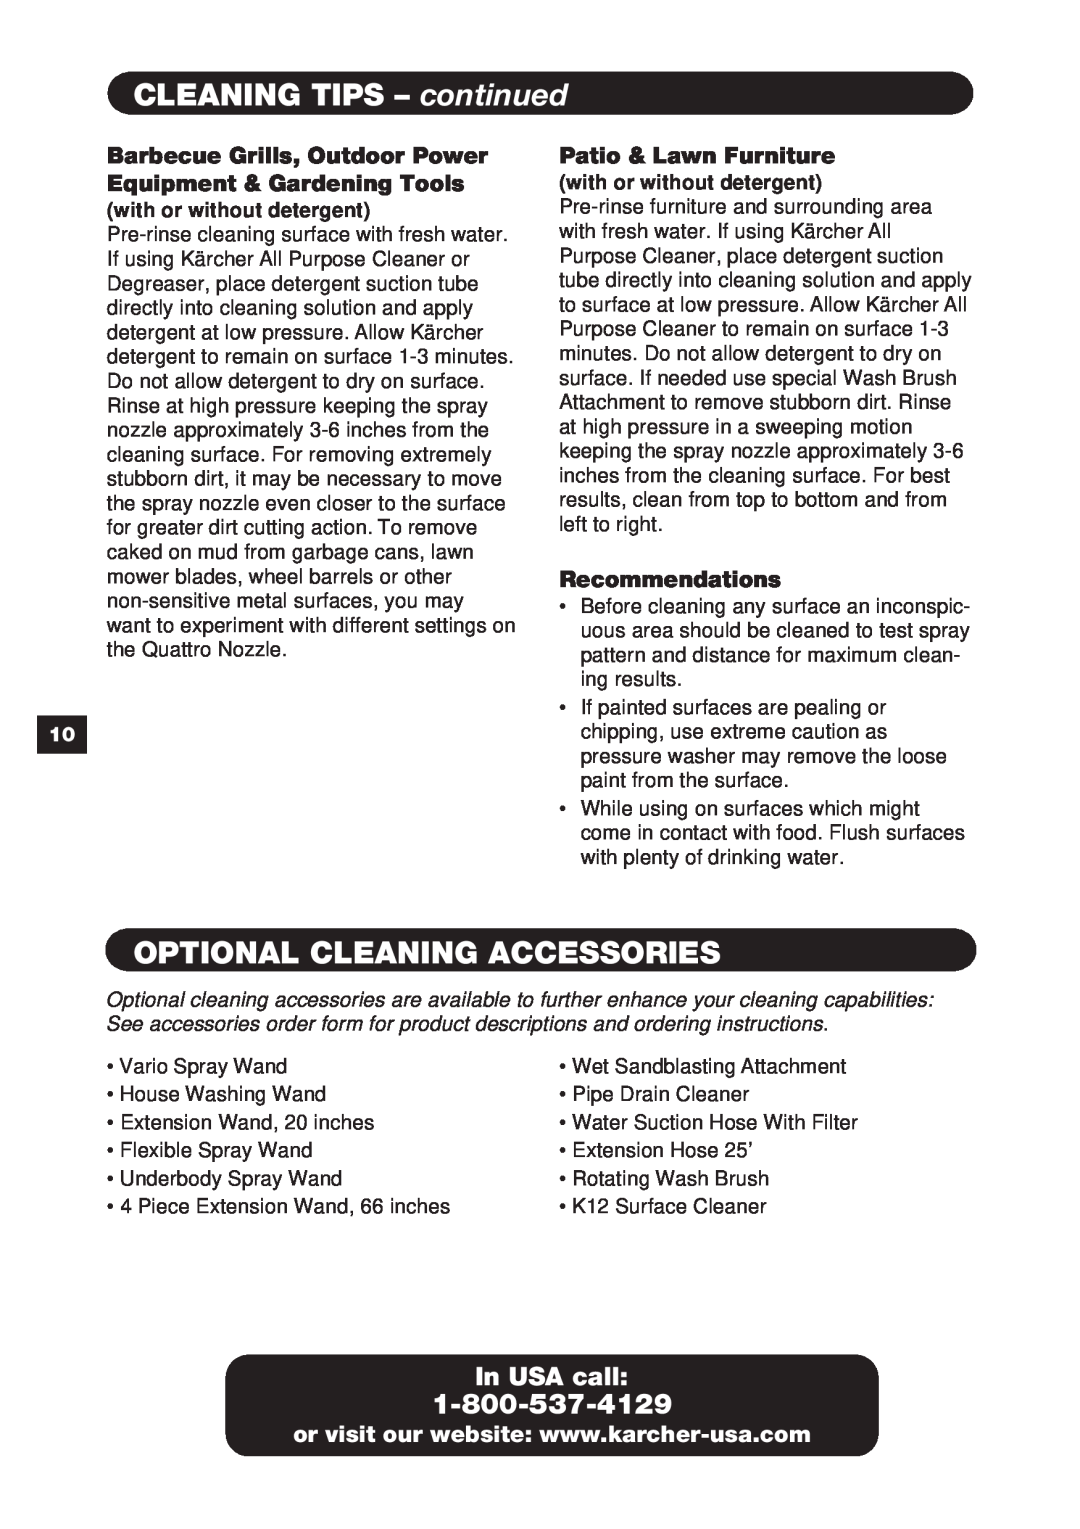 Karcher K 3.99 M CLEANING TIPS - continued, Optional Cleaning Accessories, Patio & Lawn Furniture, Recommendations 